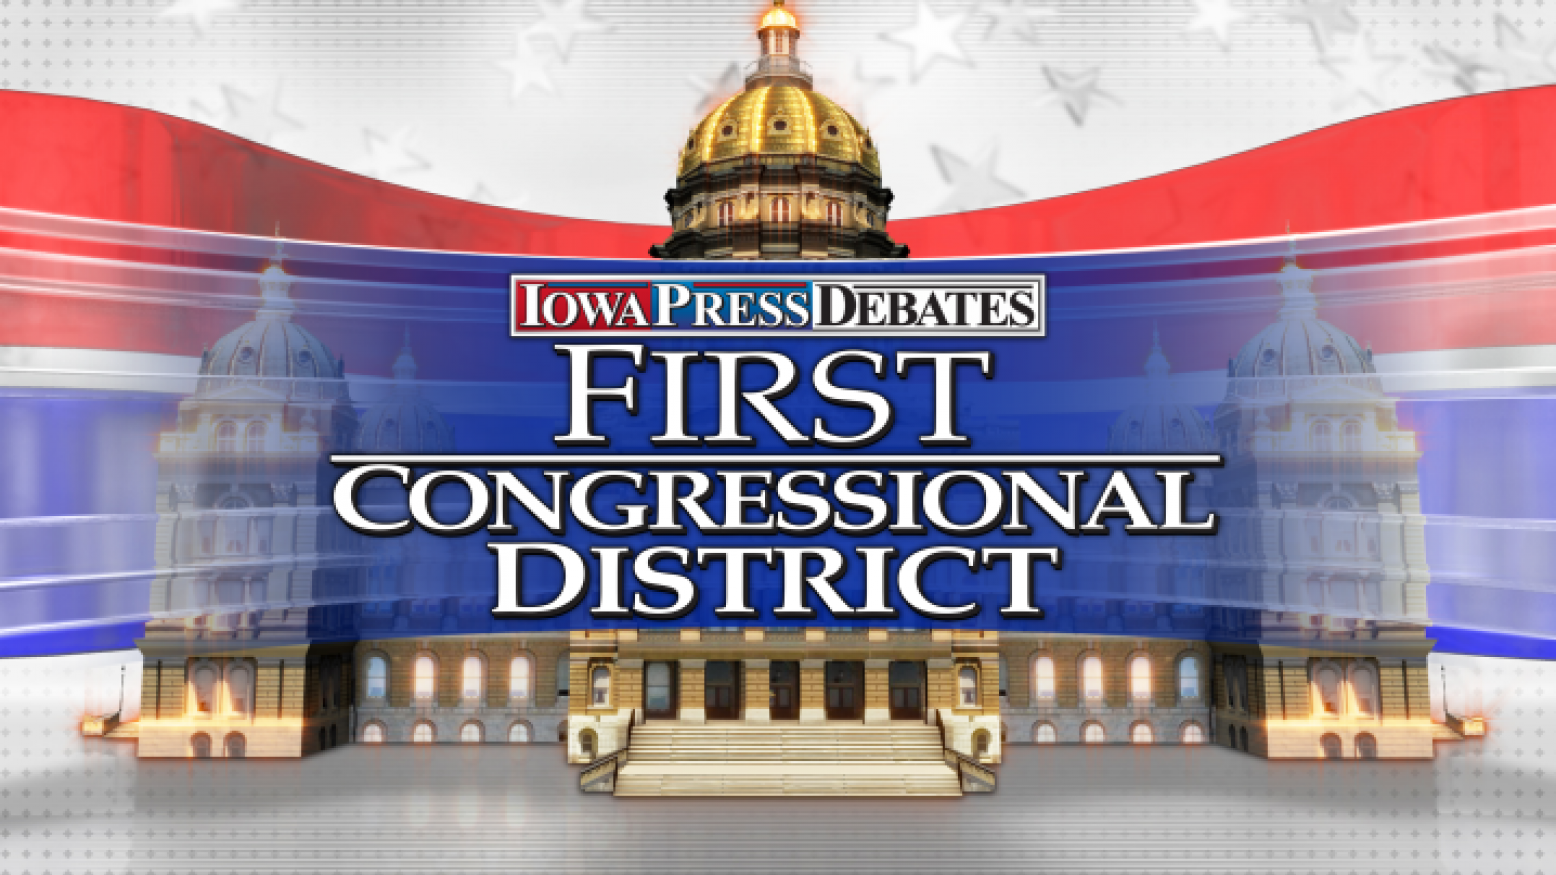 An illustration of the Iowa Capitol with a background of red, white and blue. In front of the Capitol is the logo for Iowa Press Debates: First Congressional District.